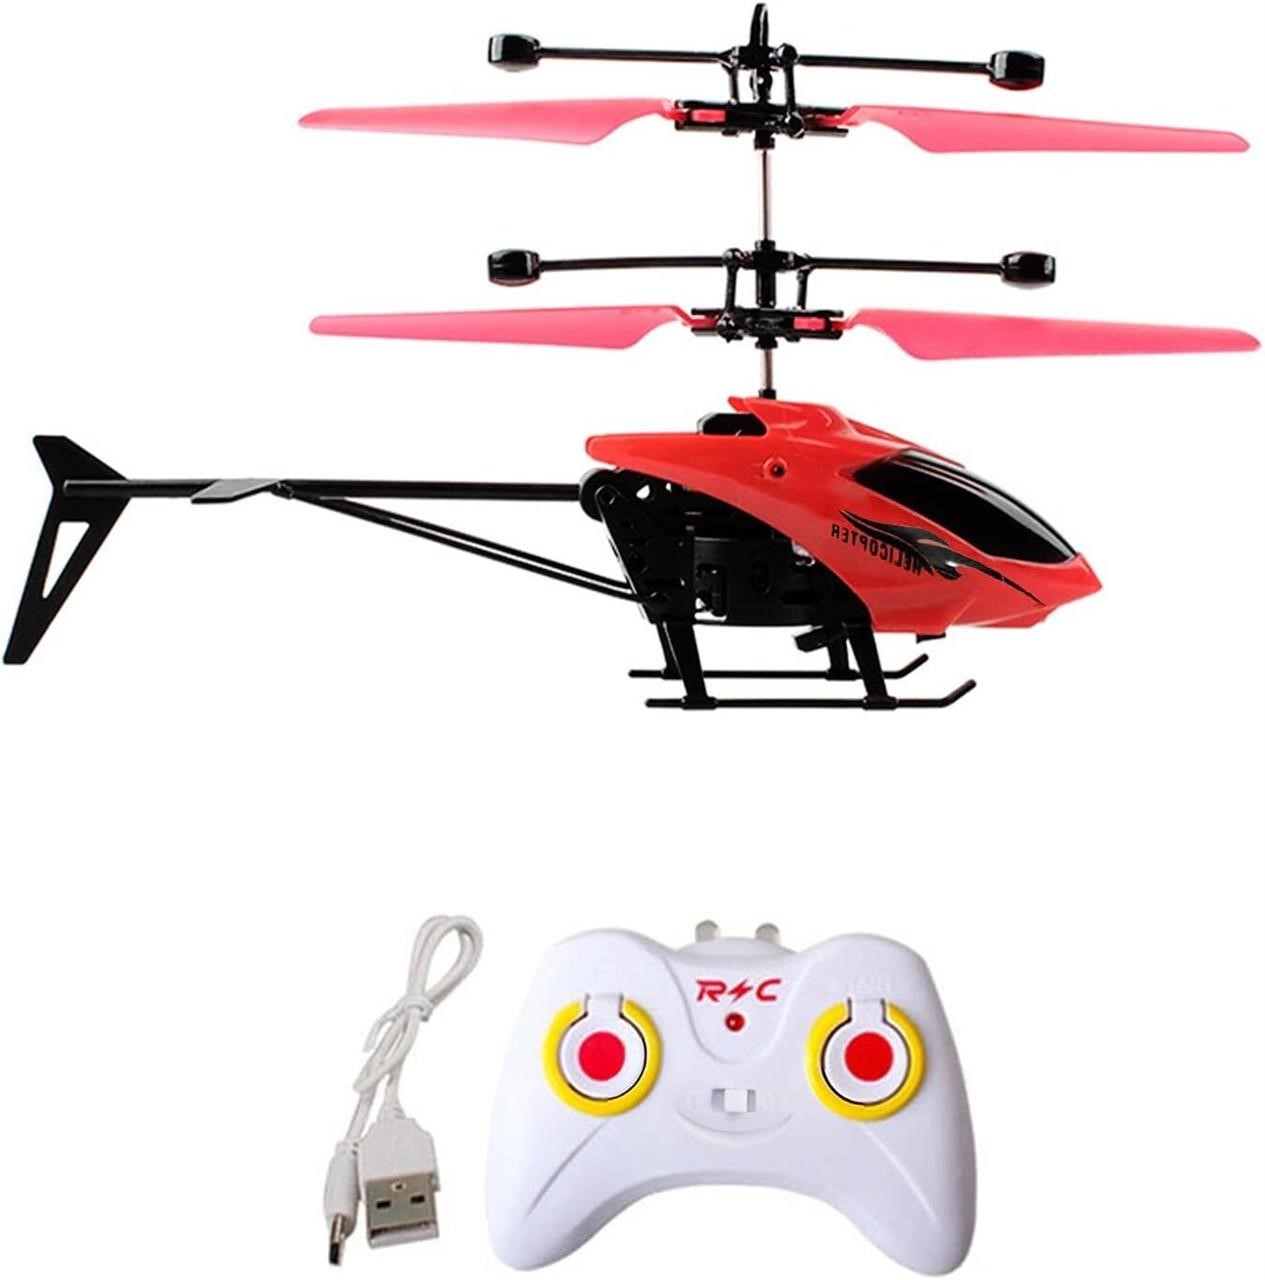 Muised Mini Drones for Kids or Adults (Red)